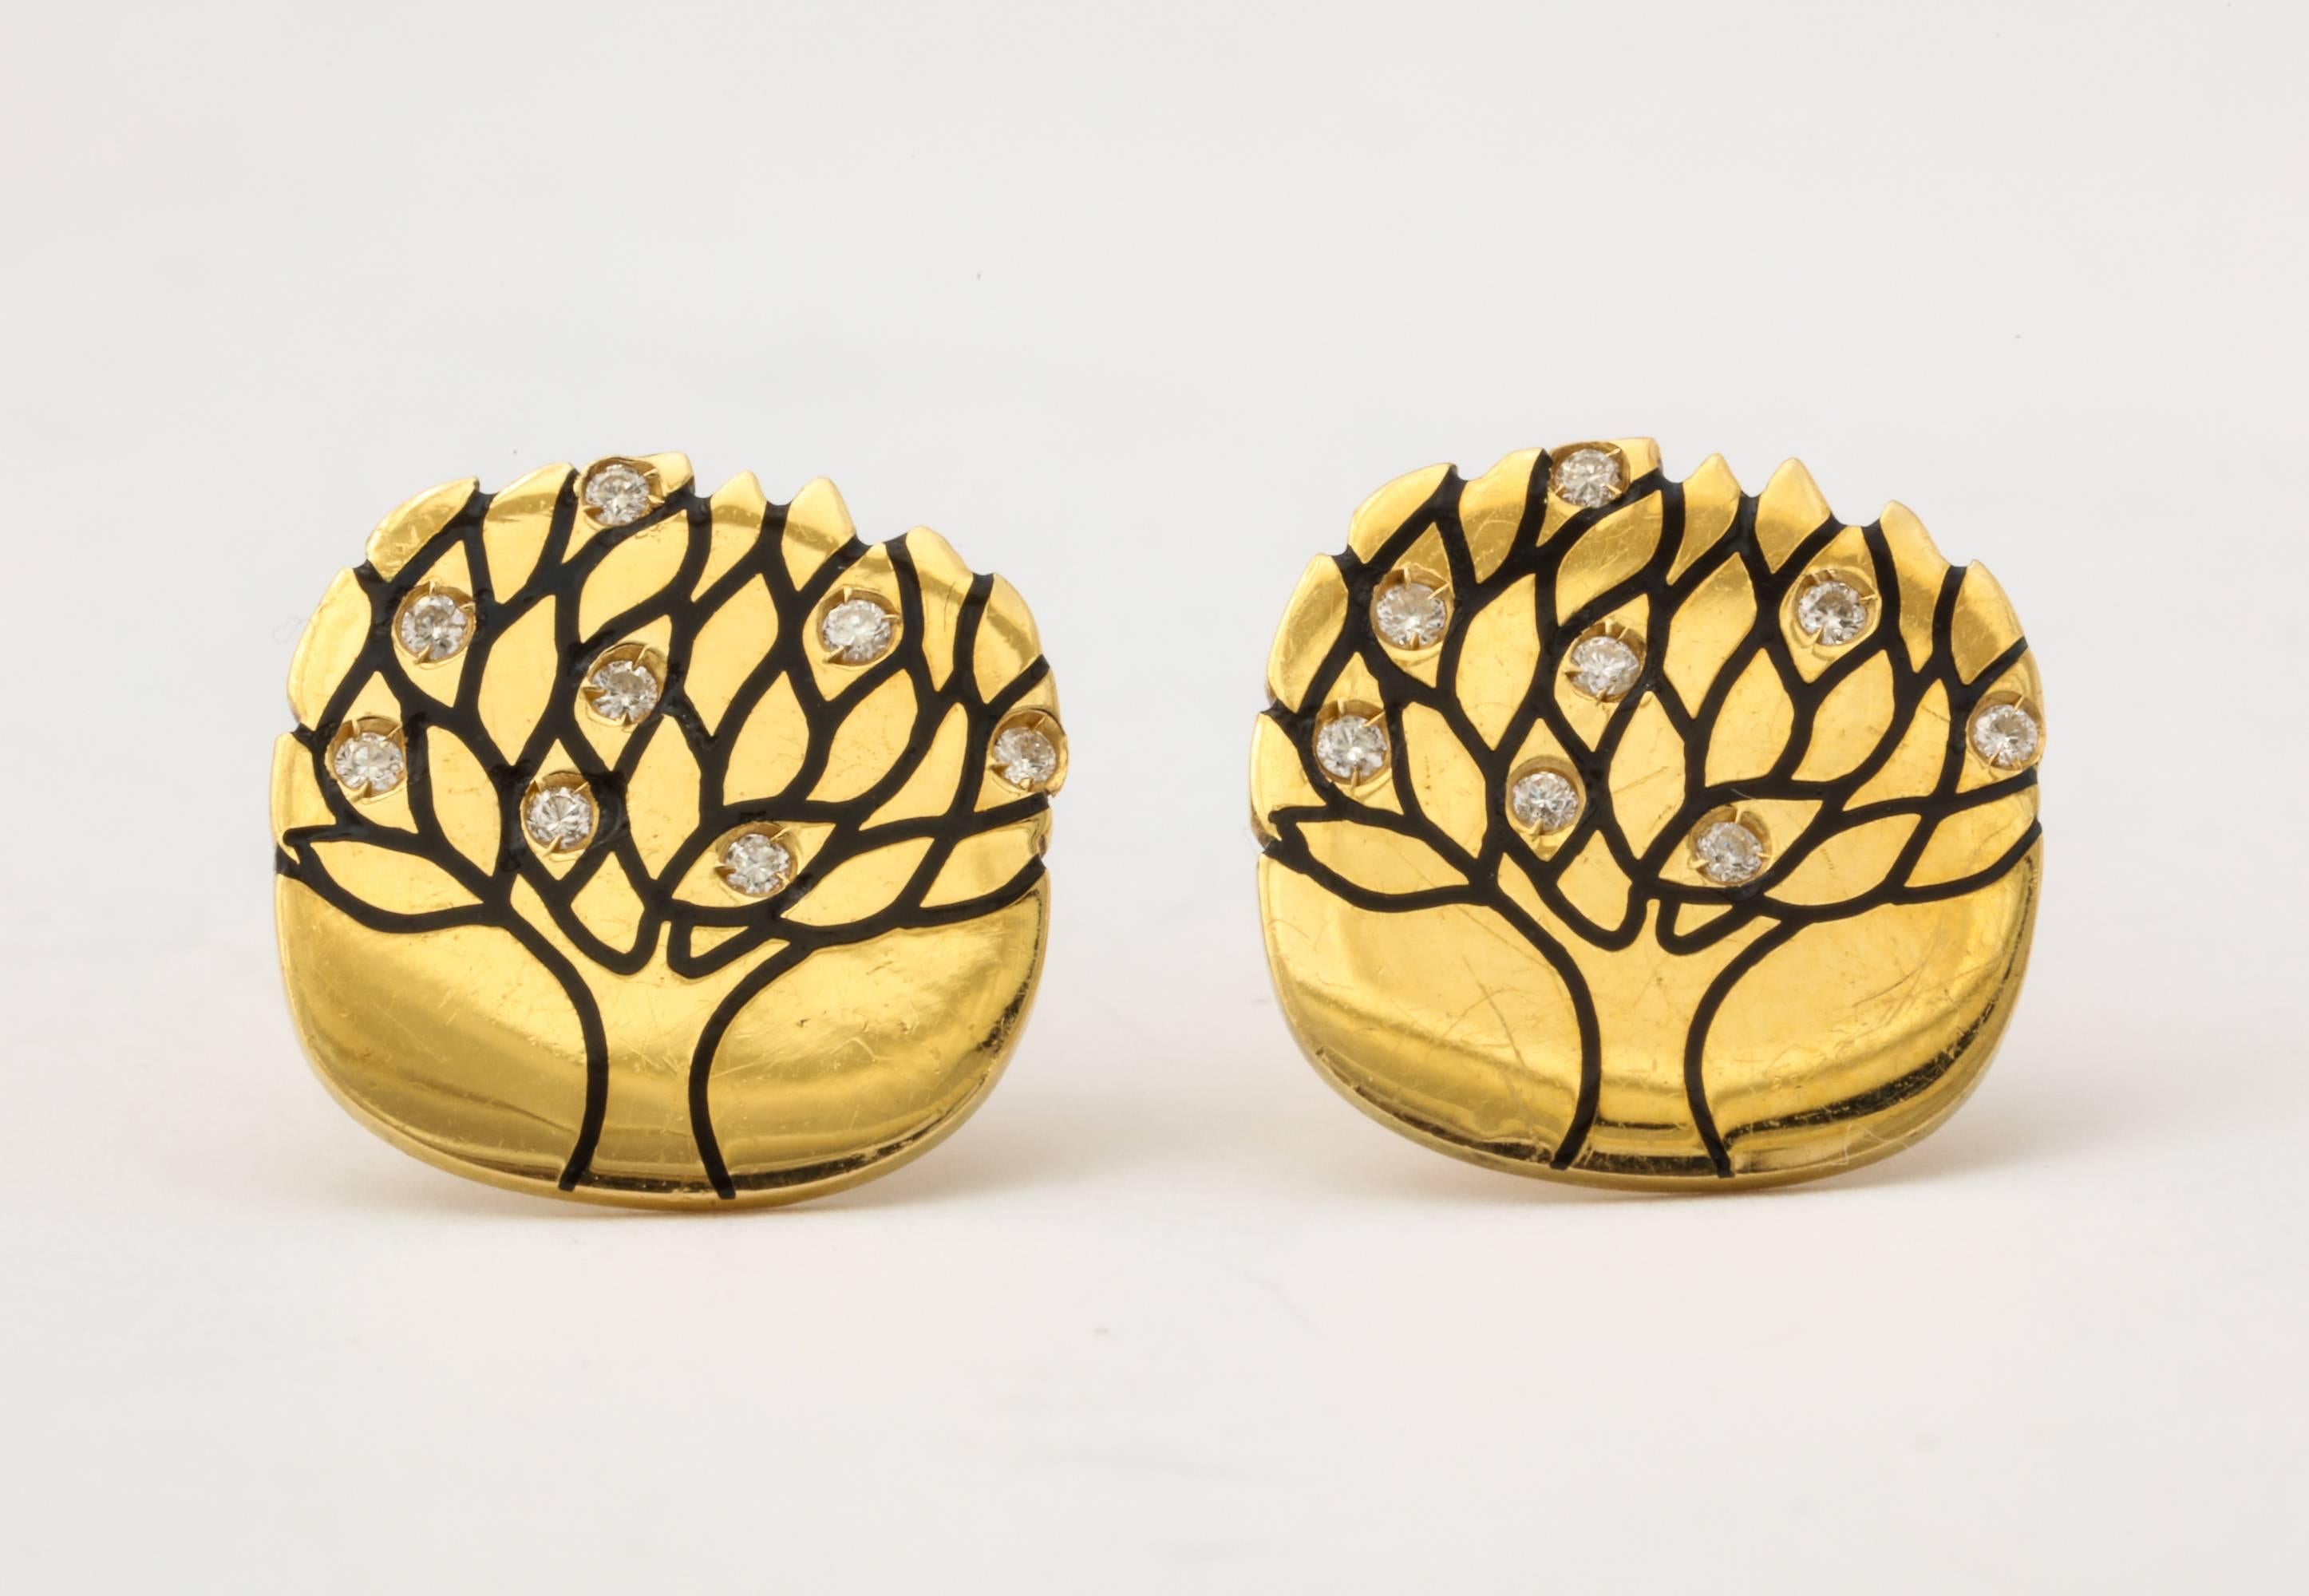 Beautifully graphic rounded square 18K gold cufflinks, the low relief image of stylized fruit trees detailed in black enamel, with the subtle  spark of scattered diamonds. 1/2 inch diameter, Italian gold and registry marks.